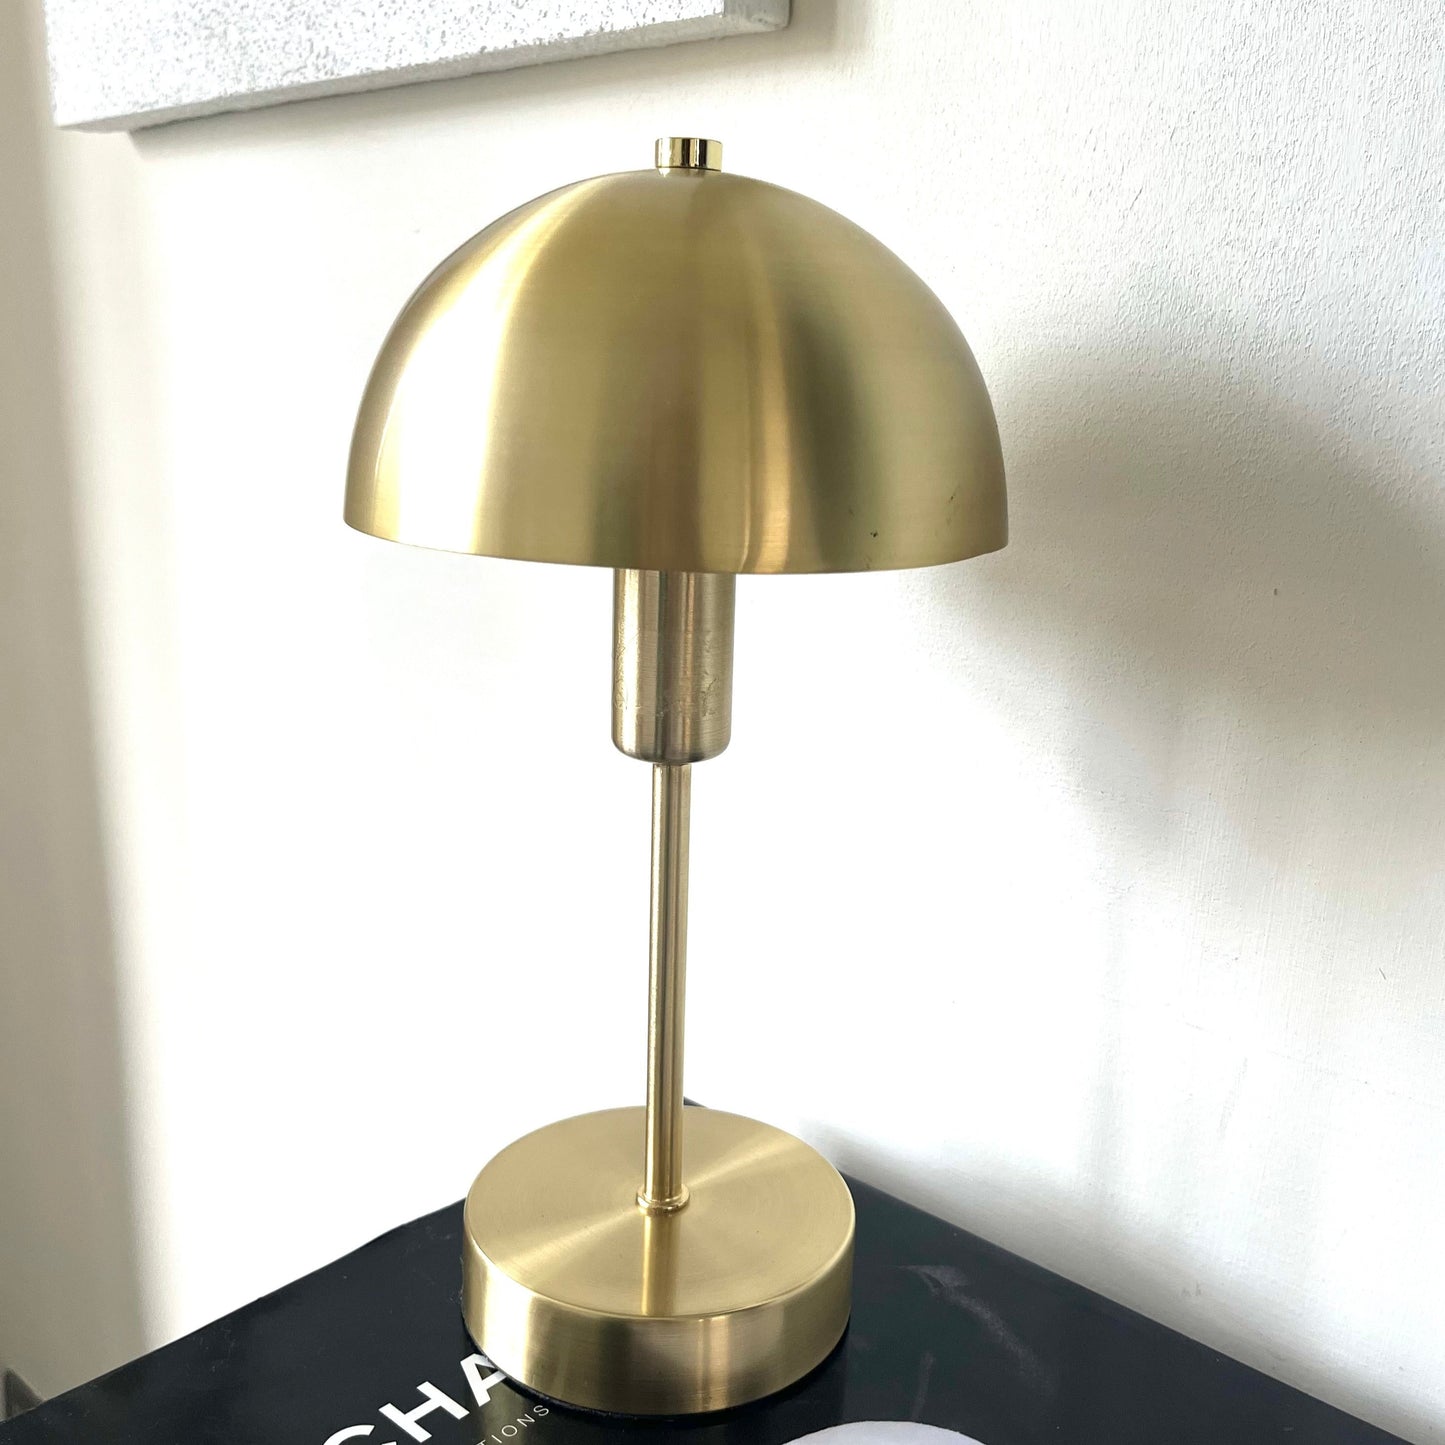 Introducing our Nellie table lamp with its distinctive dome-shaped shade and metal frame, this lamp will become a strong visual element in your space. Thanks to its gold matt antique metal finish, it will suit both modern and Mid-Century inspired settings. Light reflects off the shade to enhance a warm and inviting glow.